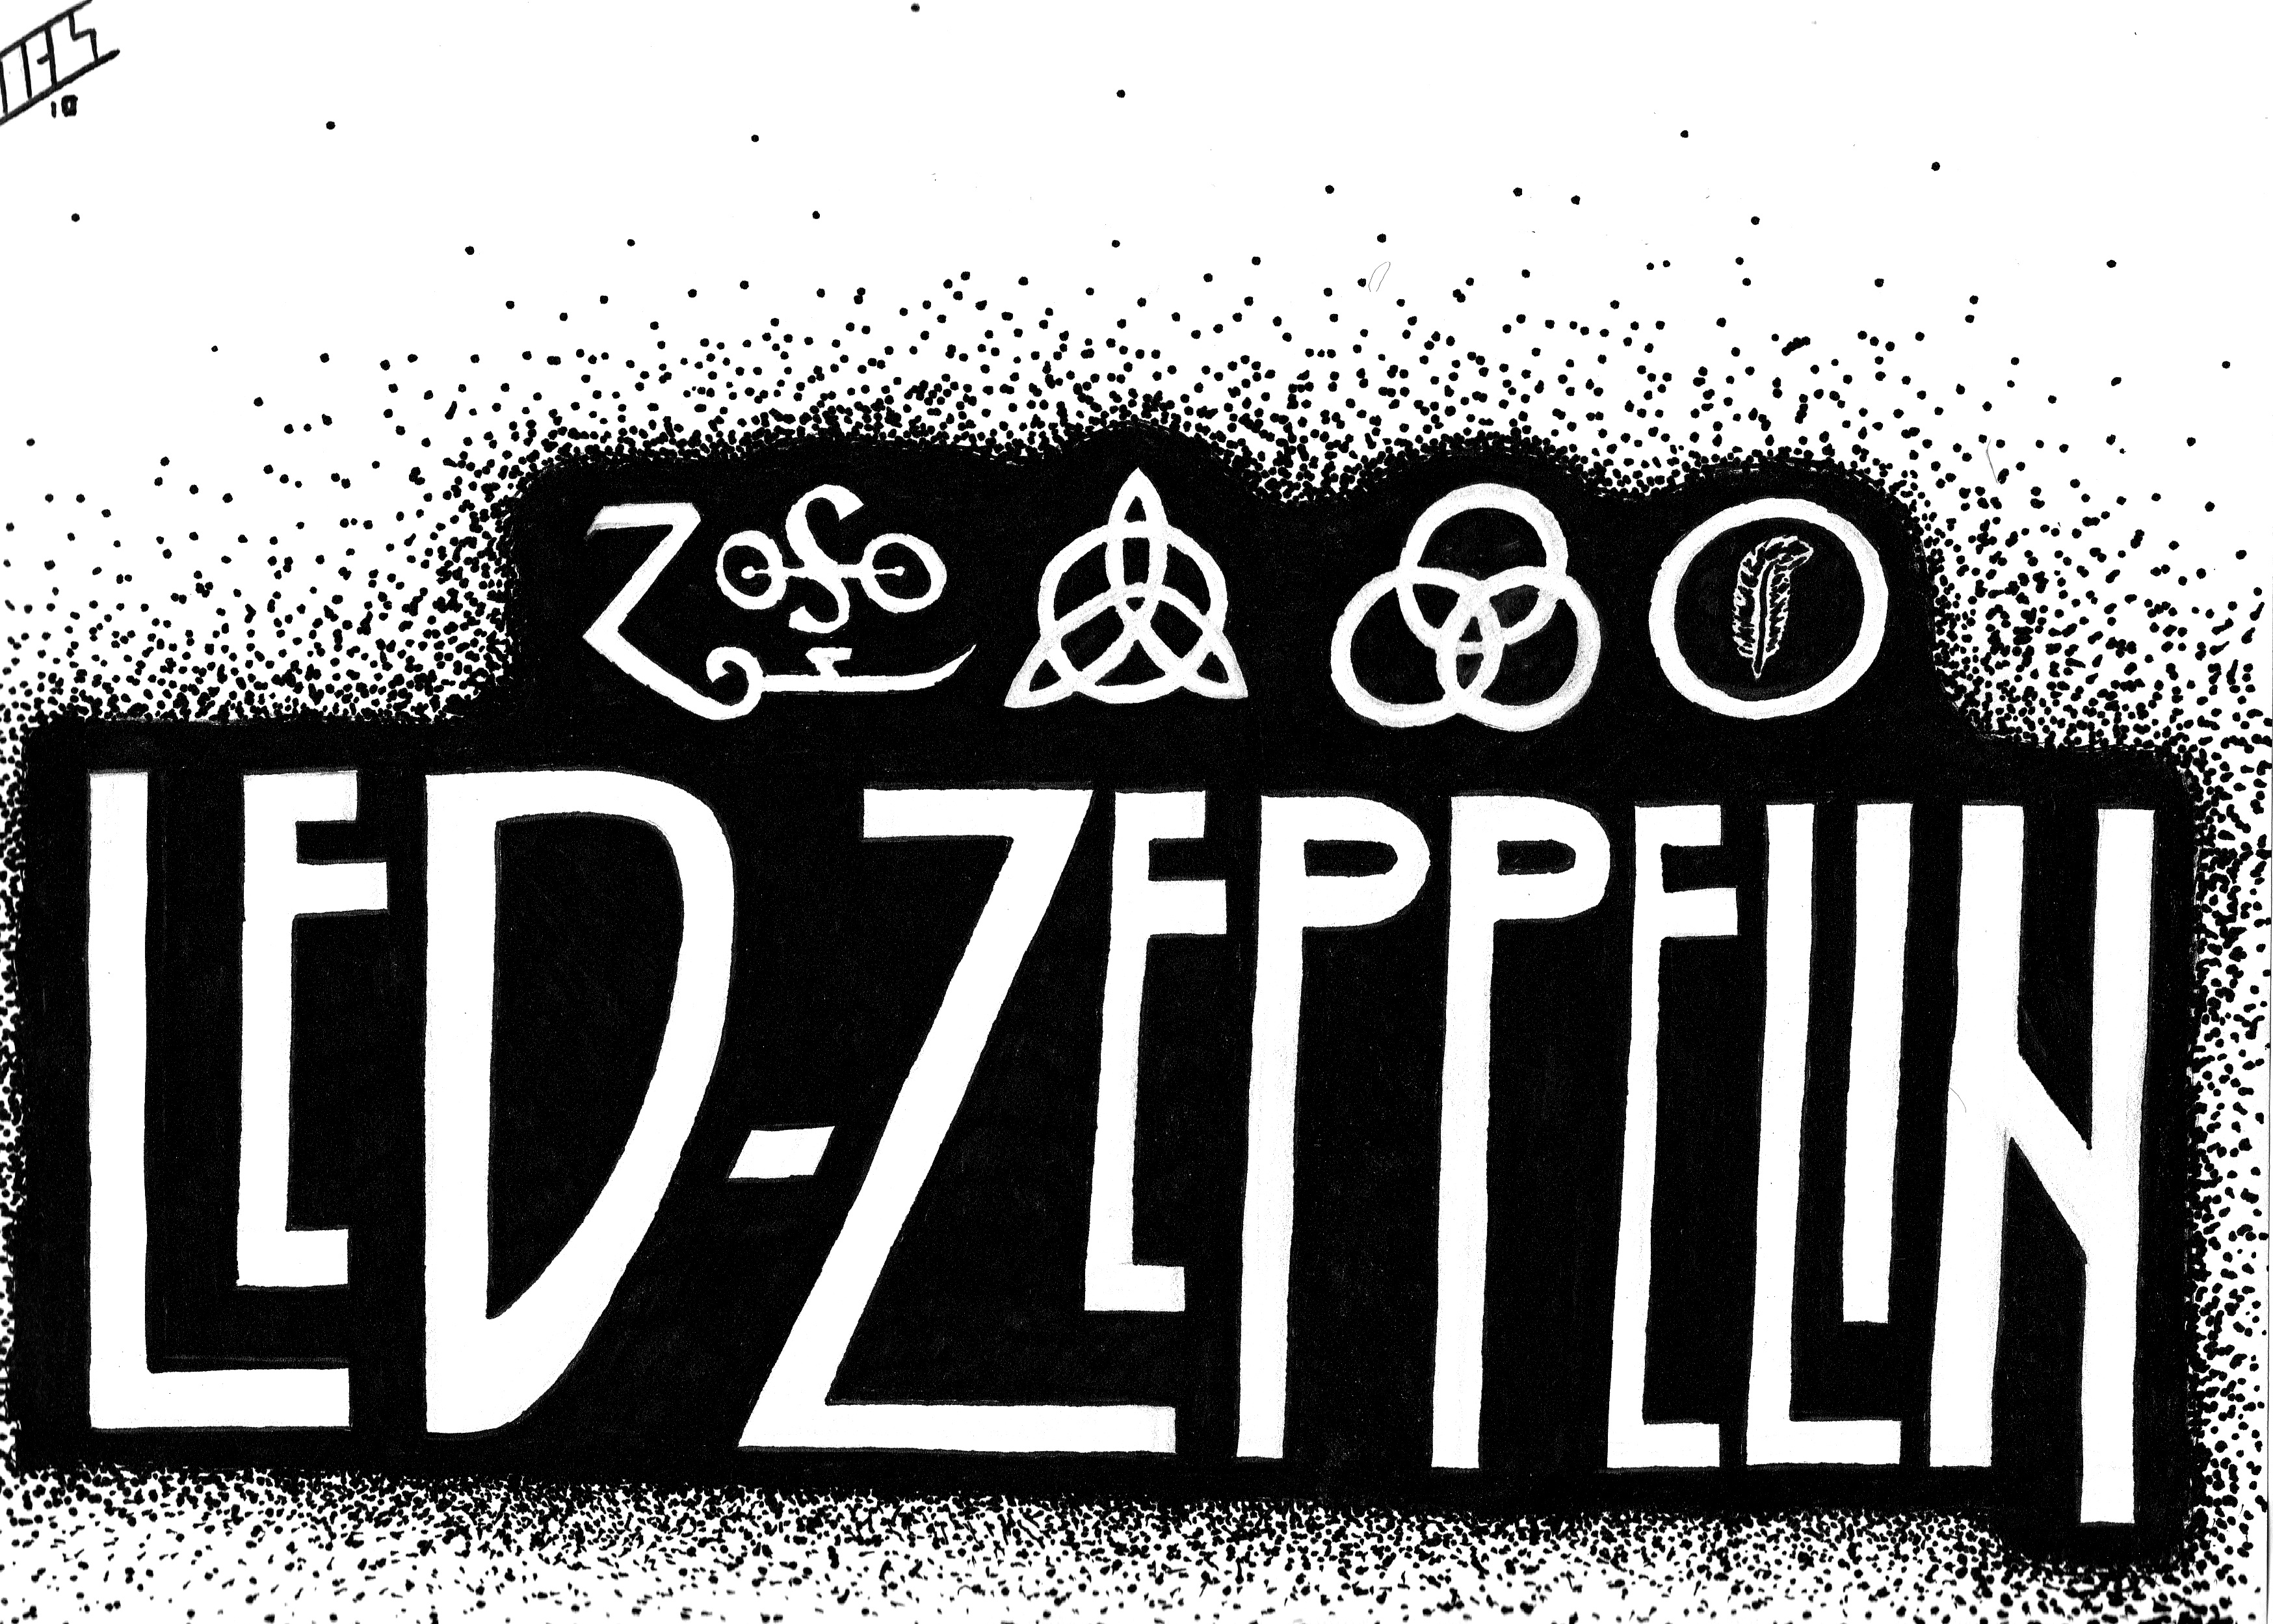 led, Zeppelin, Hard, Rock, Classic, Groups, Bands, Jimmy, Page, Robert, Plant, Album, Covers Wallpaper